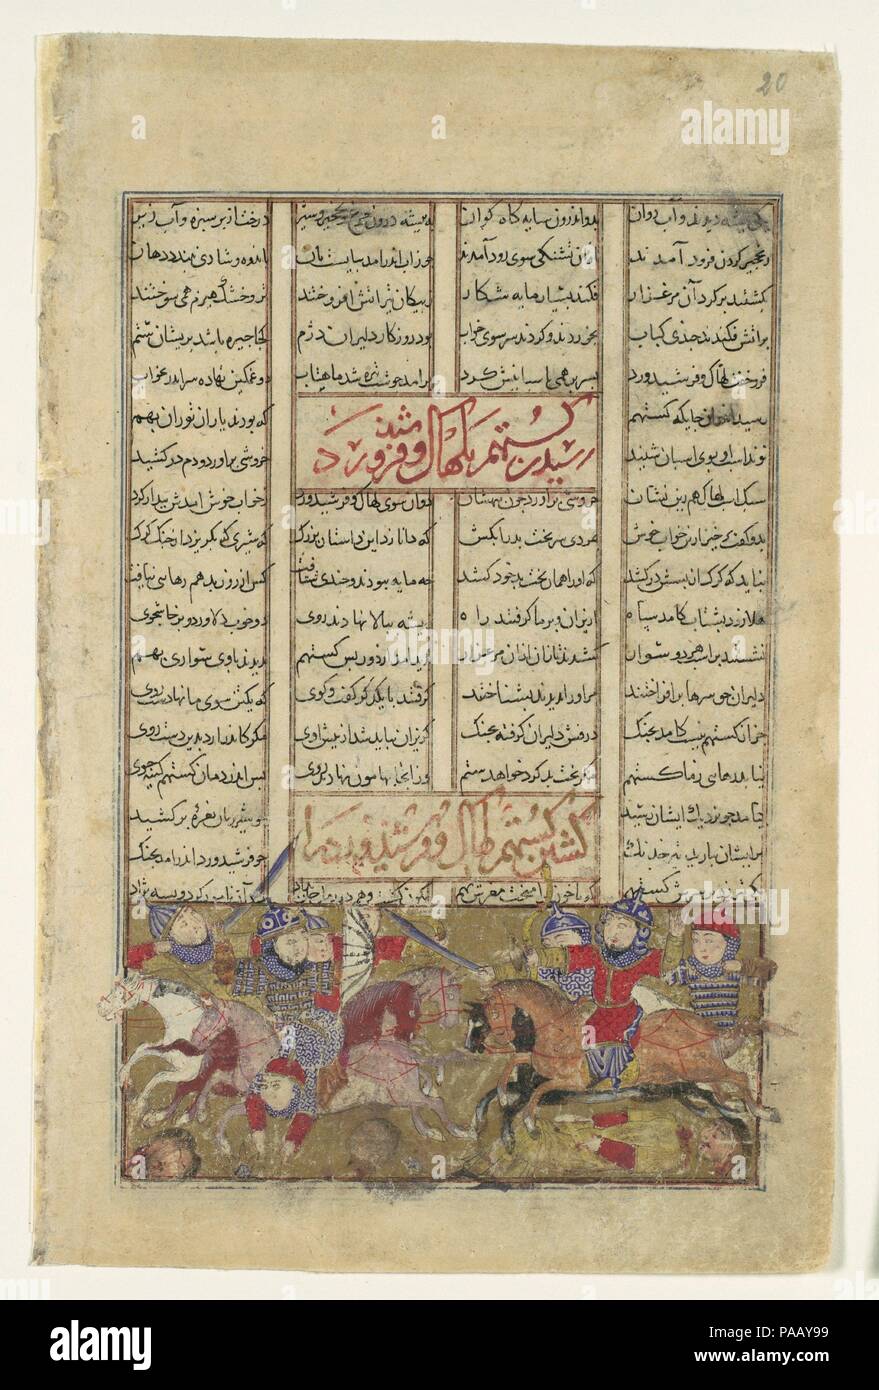 'Gustaham Slays Lahhak and Farshidvard', Folio from a Shahnama (Book of Kings). Author: Abu'l Qasim Firdausi (935-1020). Dimensions: Page: 8 1/16 x 5 1/4 in. (20.5 x 13.3 cm)  Painting: 1 13/16 x 4 3/16 in. (4.6 x 10.6 cm). Date: ca. 1330-40.  Piran, the wise old commander-in-chief of the Turanians, was slain. He had advised his brothers that his army had been promised quarter in the event of his death but that the Turanian nobles would be in mortal danger. Therefore, the Turanian brothers Lahhak and Farshidvard fled toward Turan, pursued by the Iranian noble Gustaham. Farshidvard was killed b Stock Photo